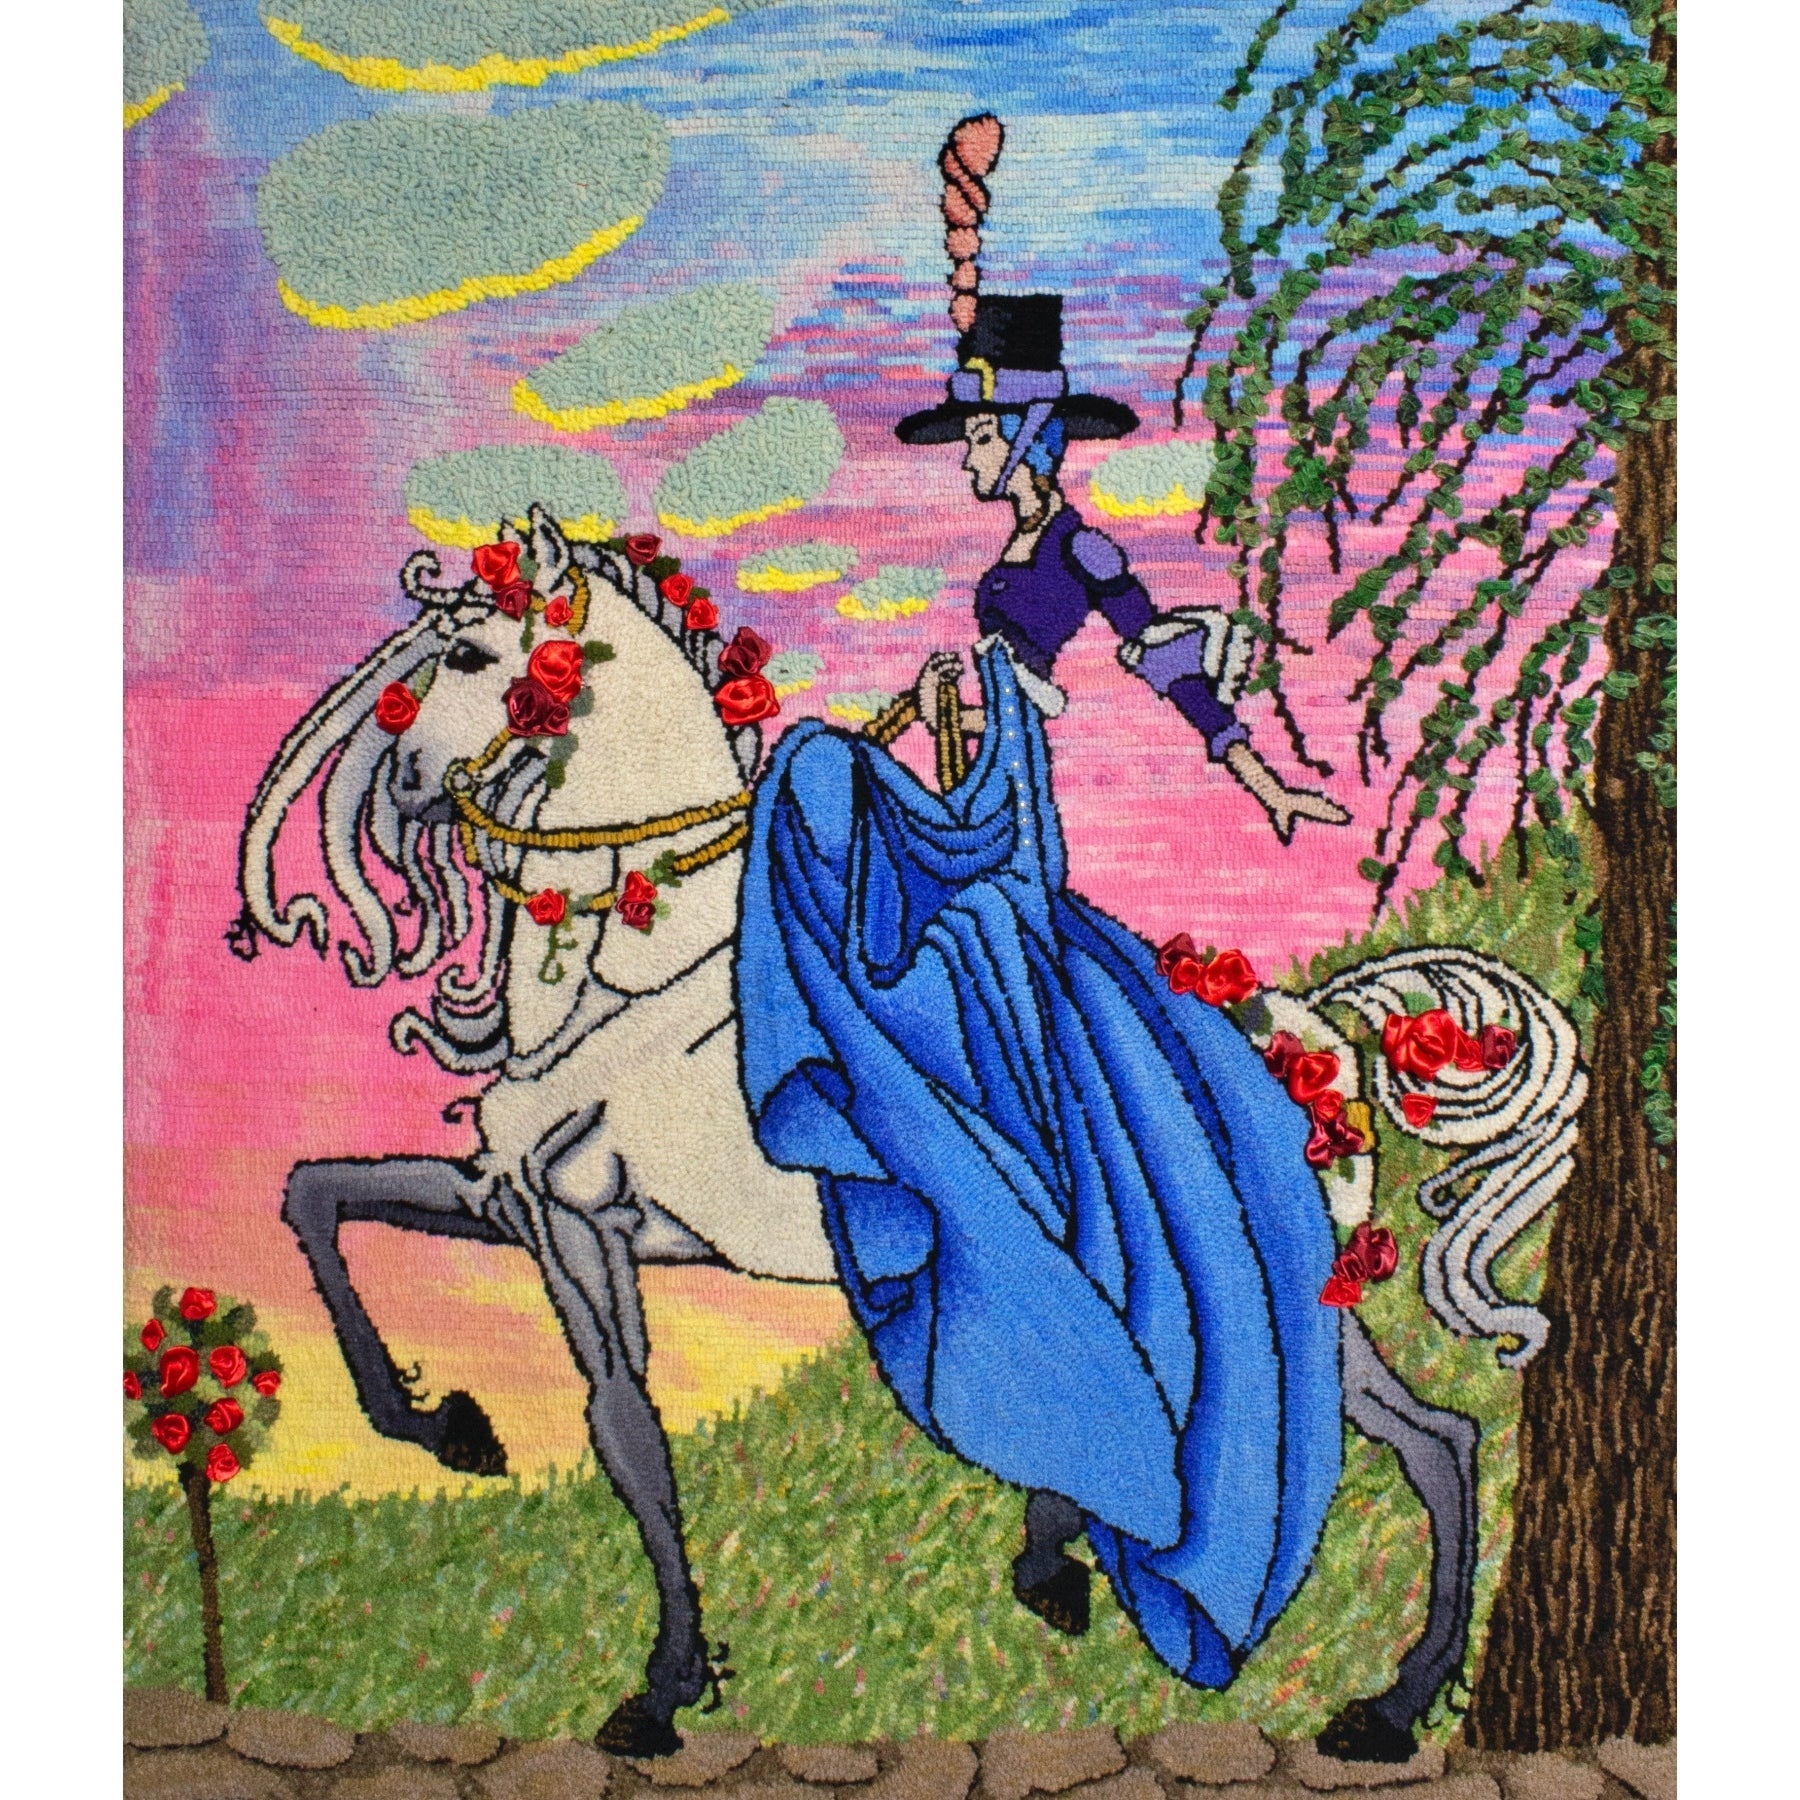 Princess Minon Minette Rides out to find Prince Soucin, ill. Kay Neilson, 1913, rug hooked by Karen Cormier